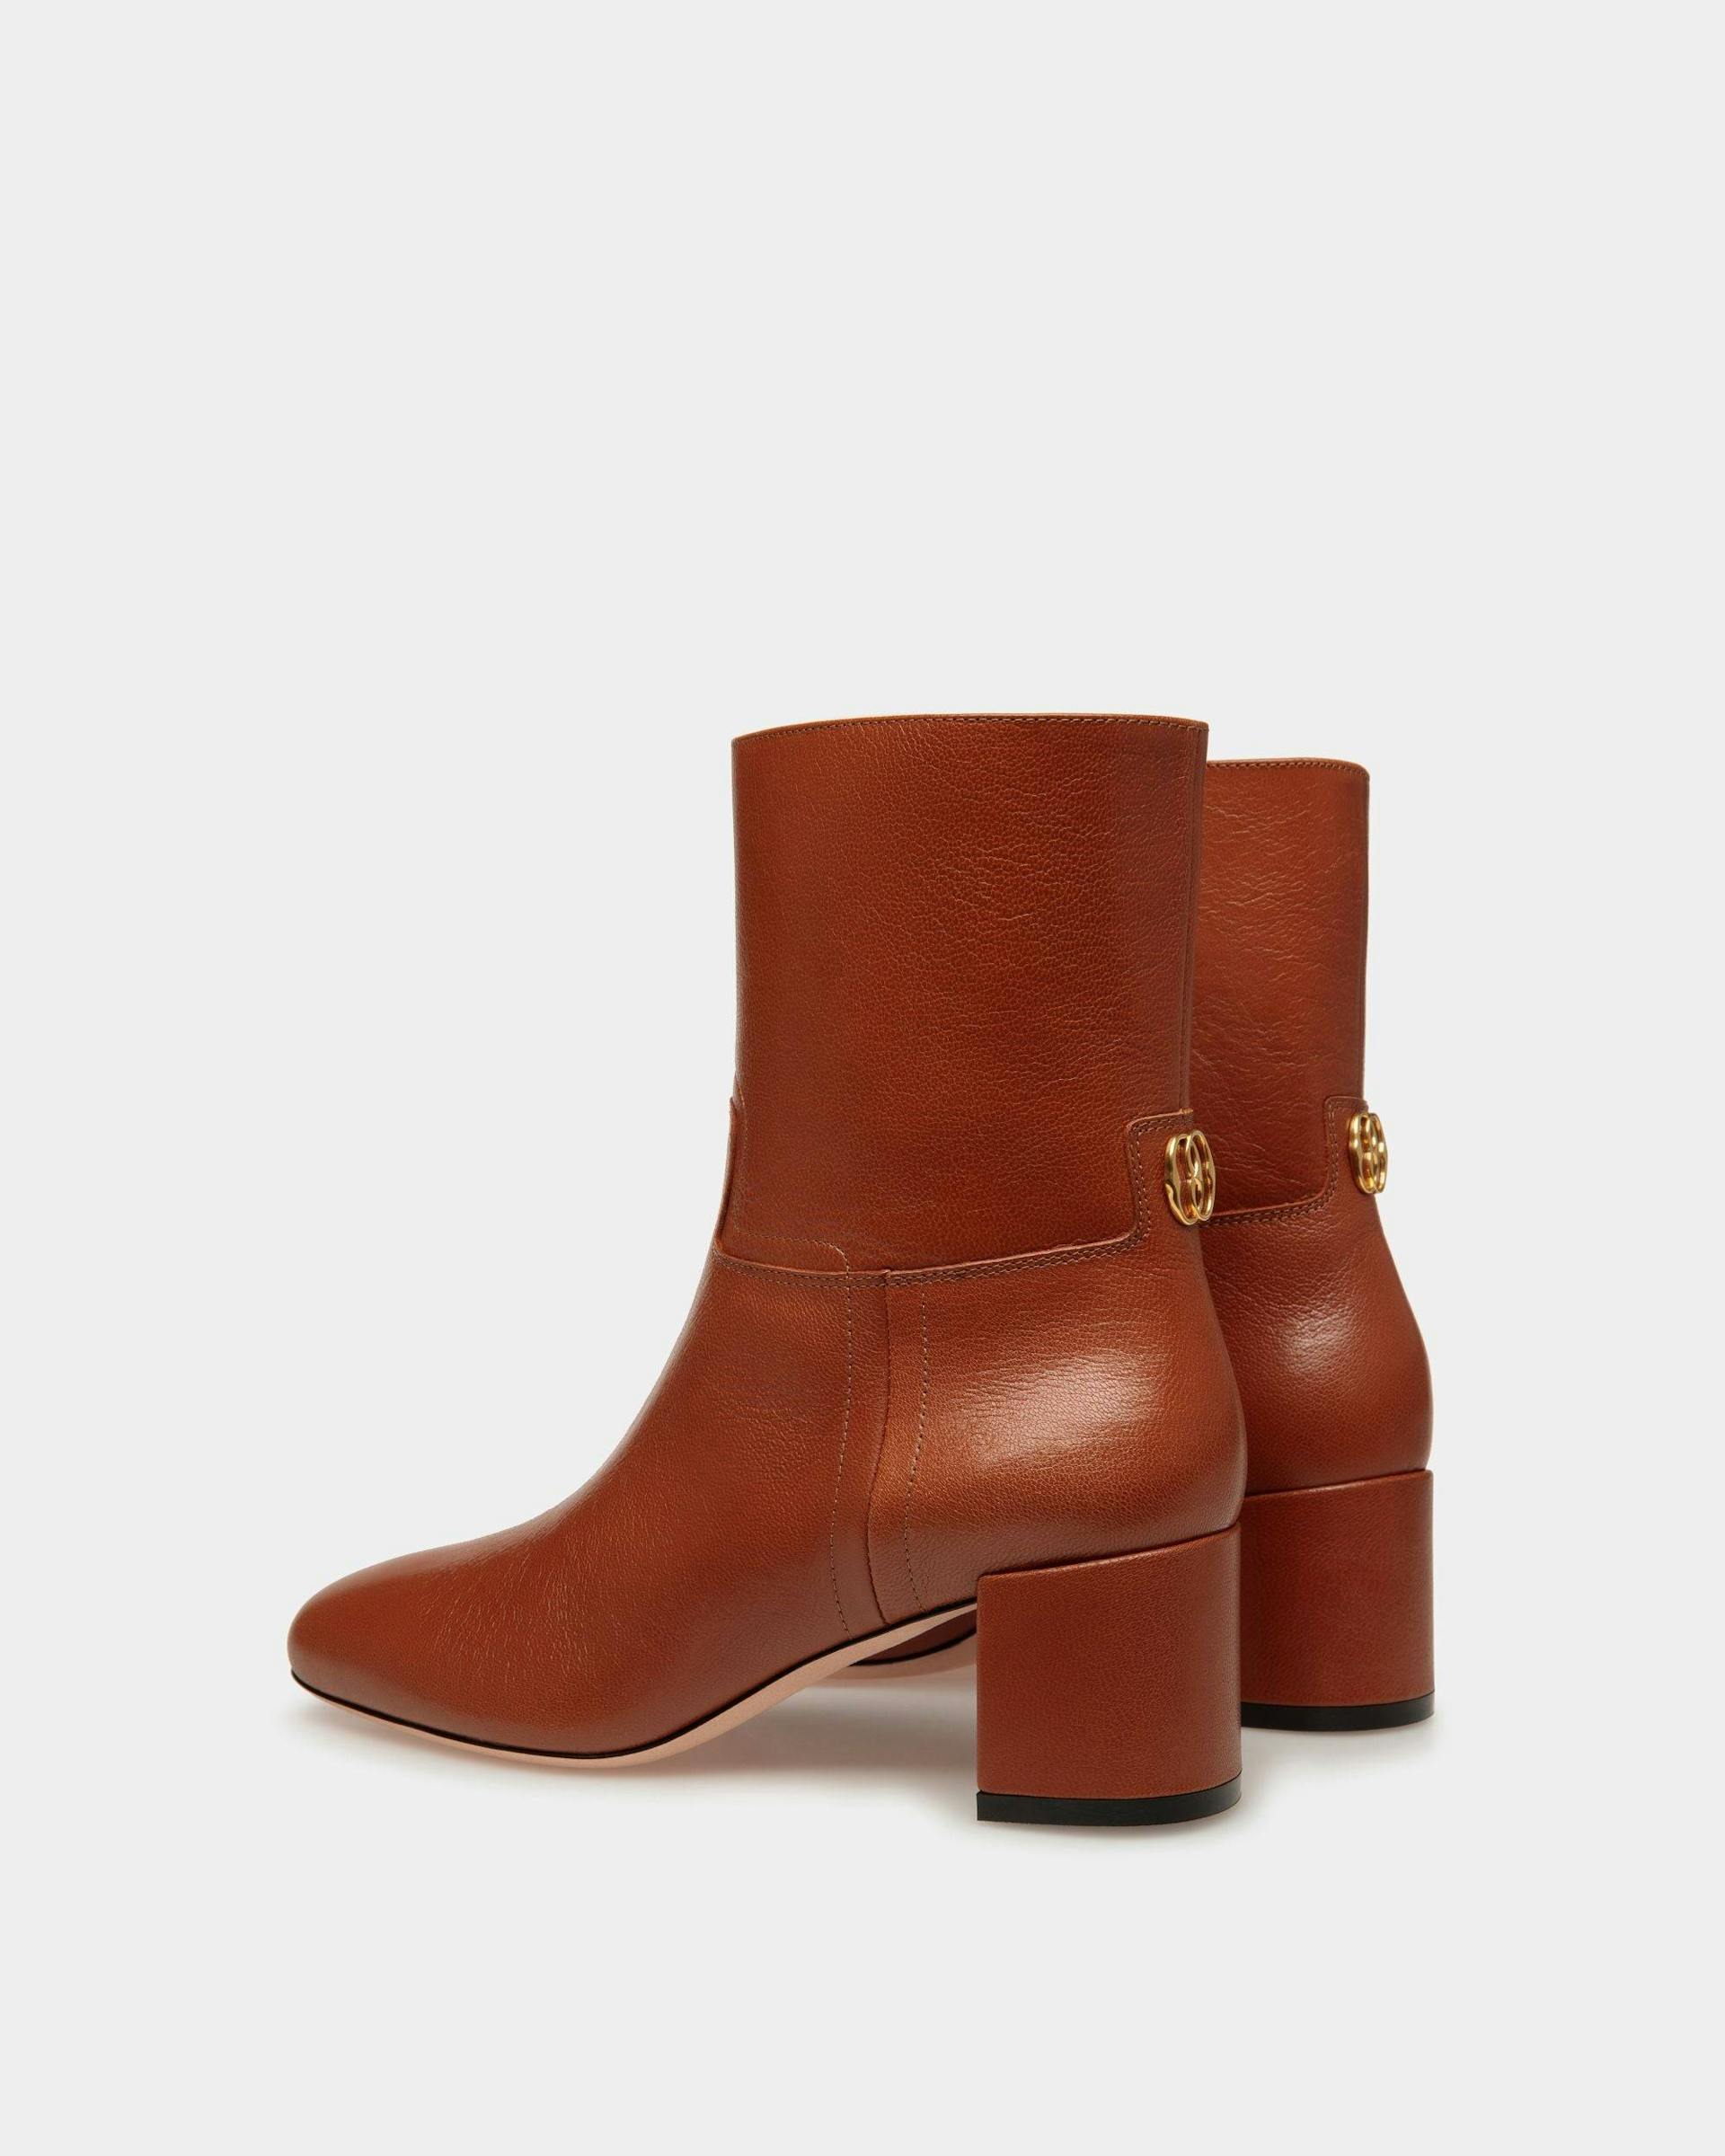 Daily Emblem Booties In Brown Leather - Women's - Bally - 03